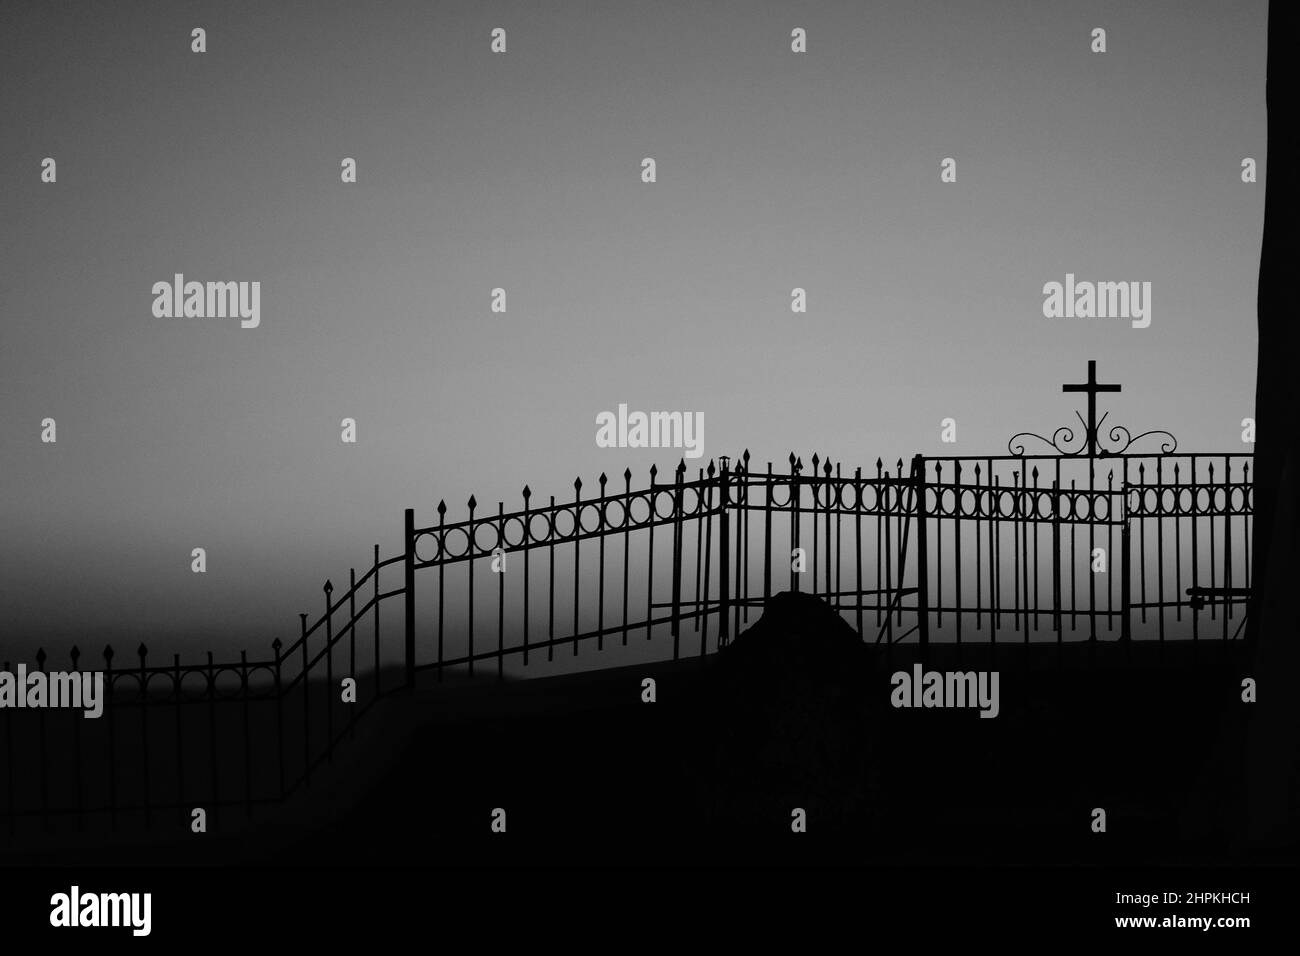 A fence with a religious cross attached to it next to a church and the aegean sea, while the sun is setting in a dramatic way in black and white Stock Photo